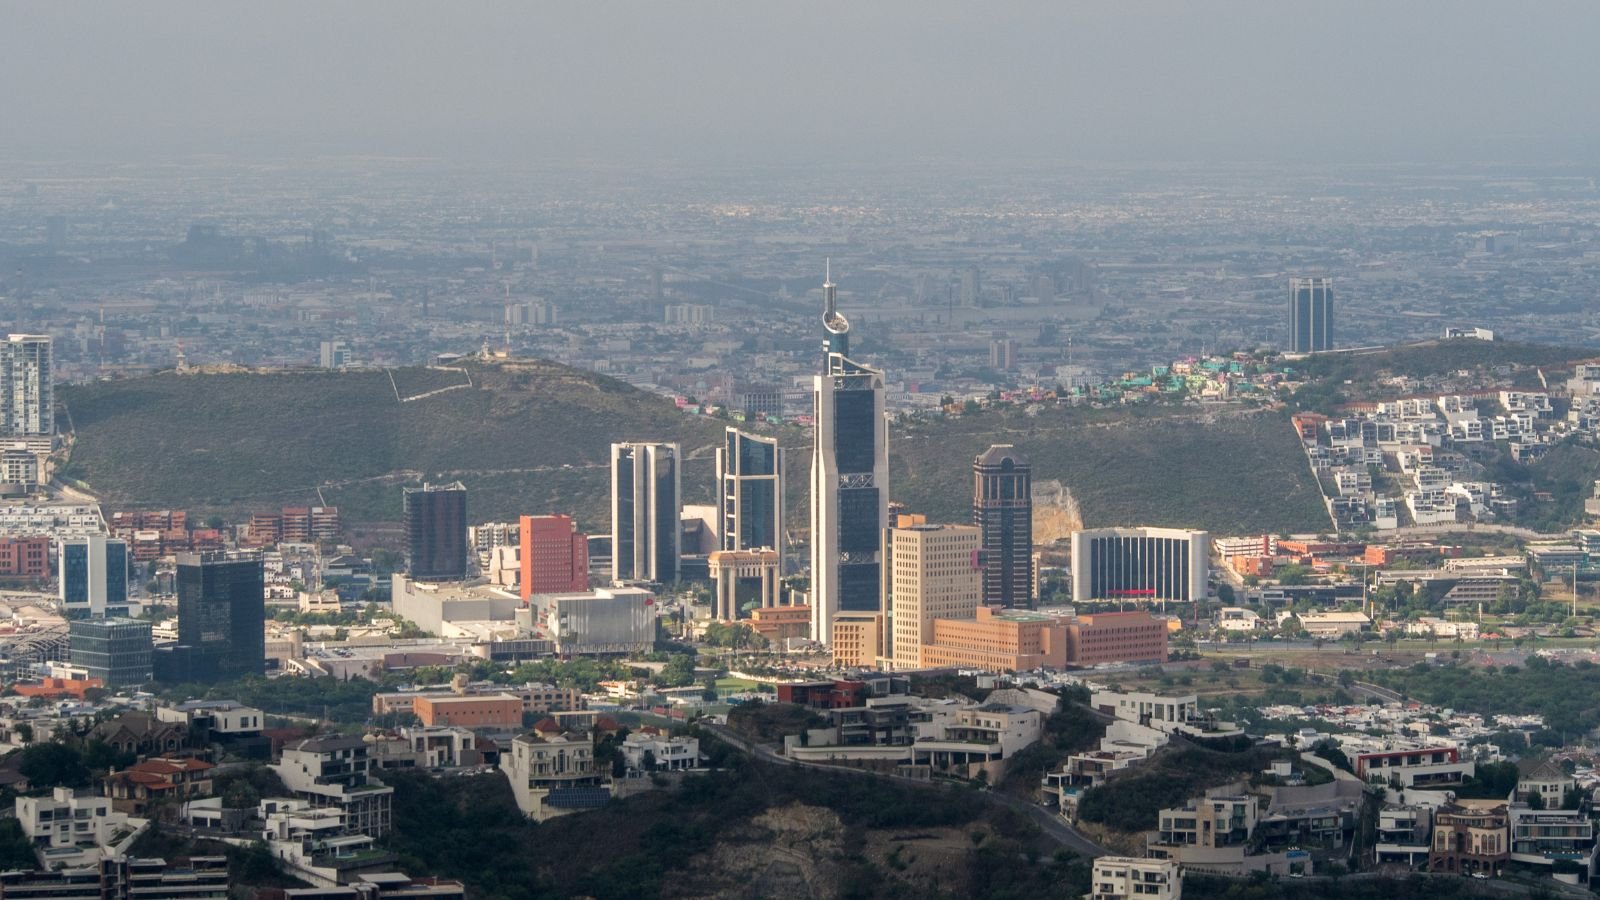 <p>Monterrey is Mexico’s third-largest city and second-most important economic hub. The city attracts expats seeking career opportunities. Its proximity to the U.S. border makes it popular among American expatriates. With <a href="https://www.unipage.net/en/universities/monterrey#:~:text=This%20article%20provides%20valuable%20information,making%20a%20well%2Dinformed%20decision." rel="noopener">over 40 universities</a>, it has a significant English-speaking population. The city is surrounded by the Sierra Madre Oriental mountains, offering plenty of scope for outdoor enthusiasts. Despite being a major city, Monterrey provides a quieter lifestyle to tourist hotspots.</p>